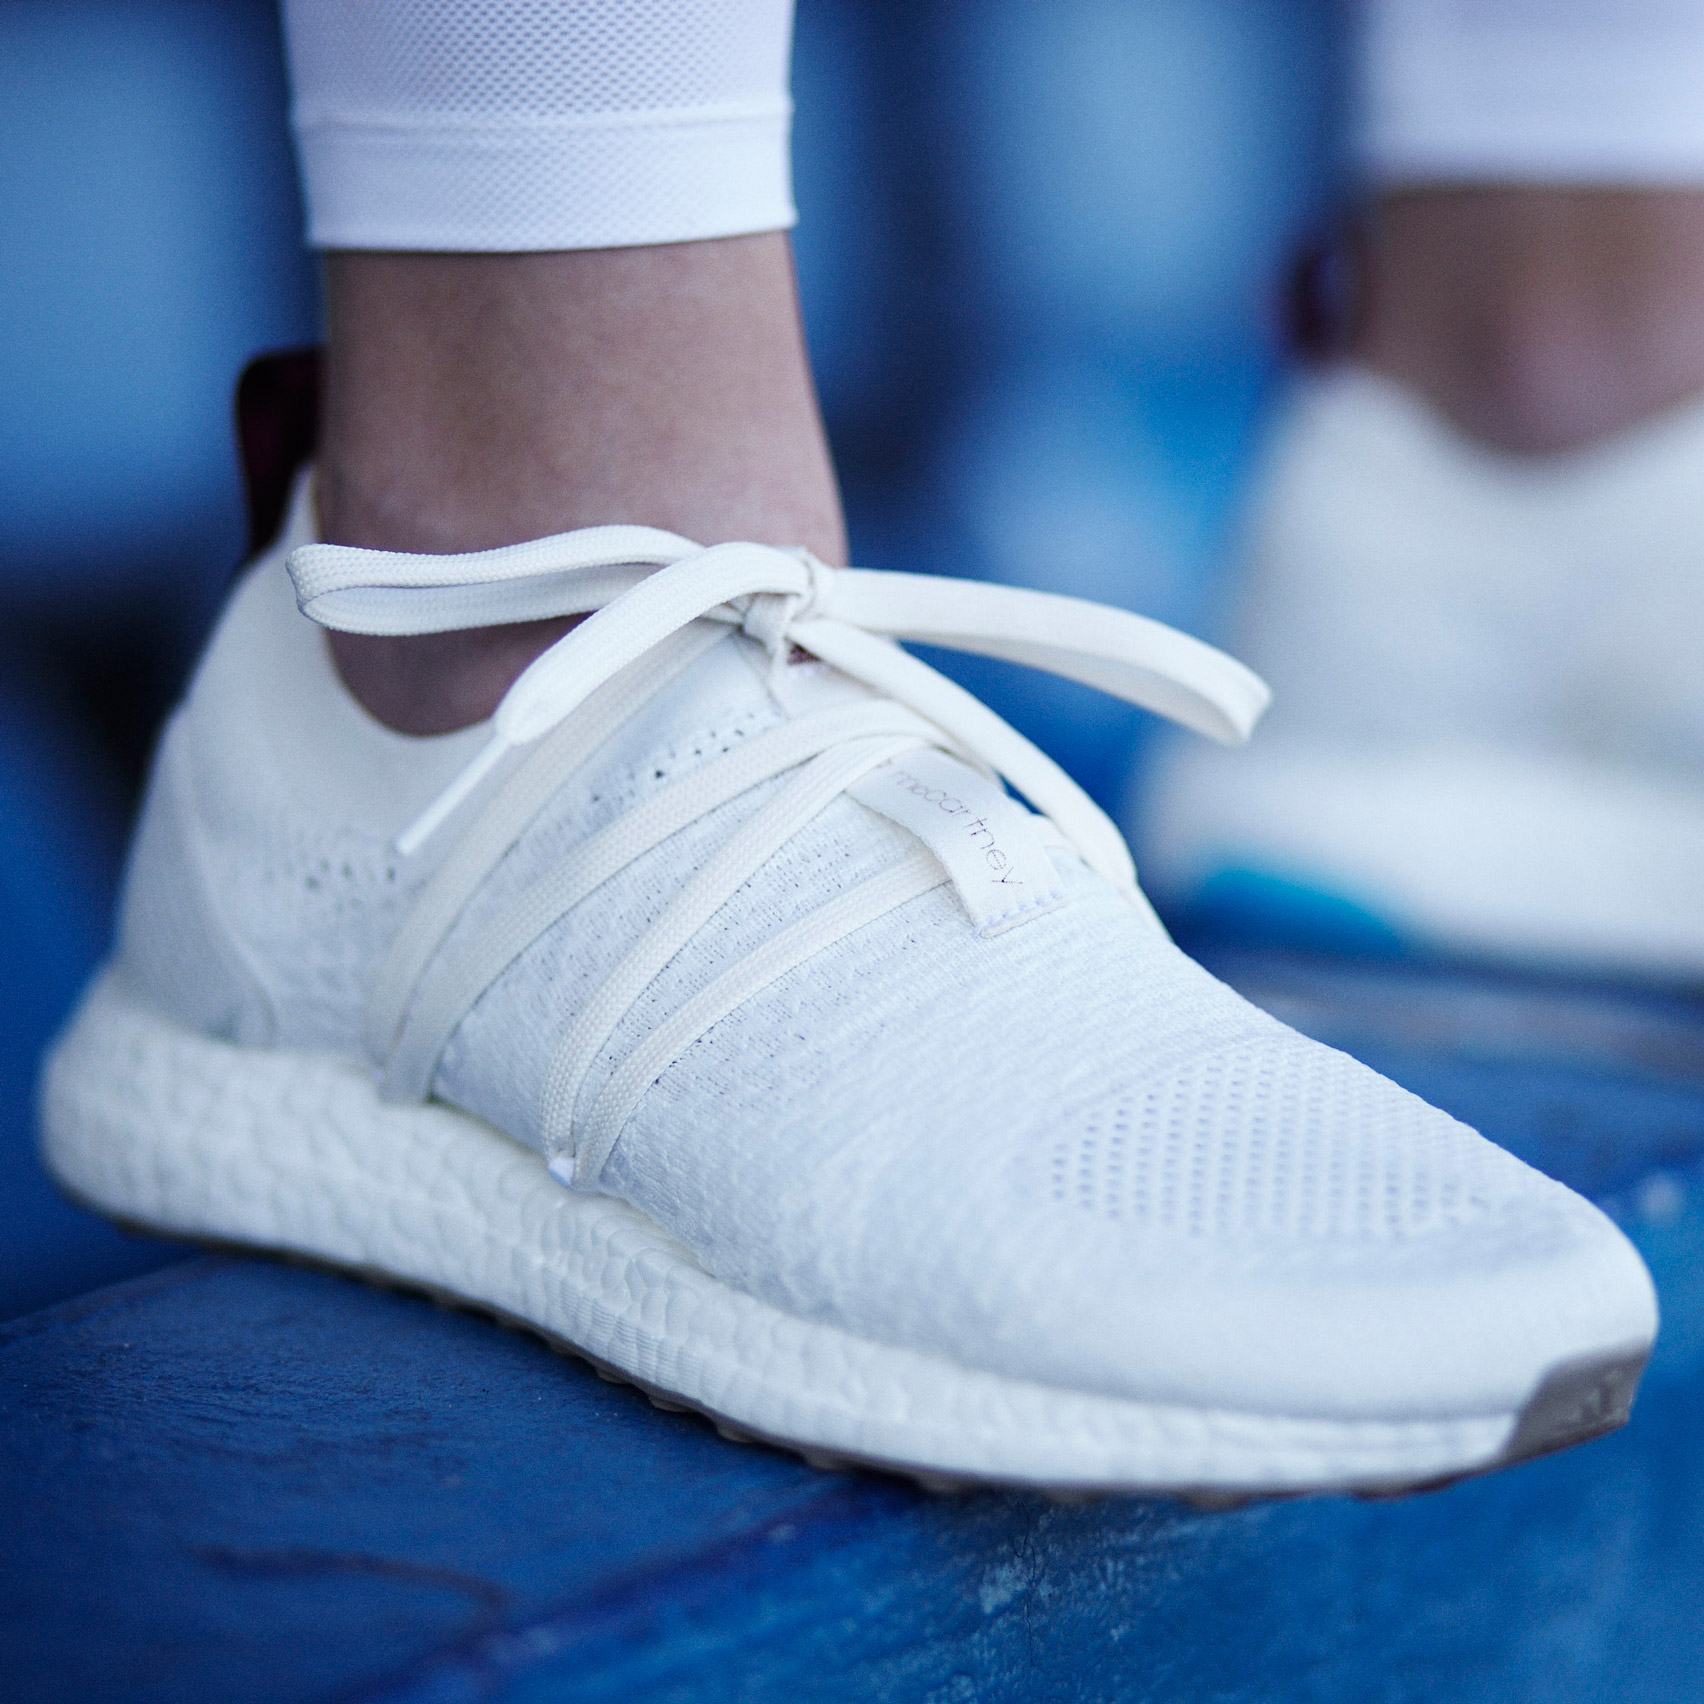 Stella McCartney and Adidas unveil Parley Ultra Boost X trainers made from  ocean plastic